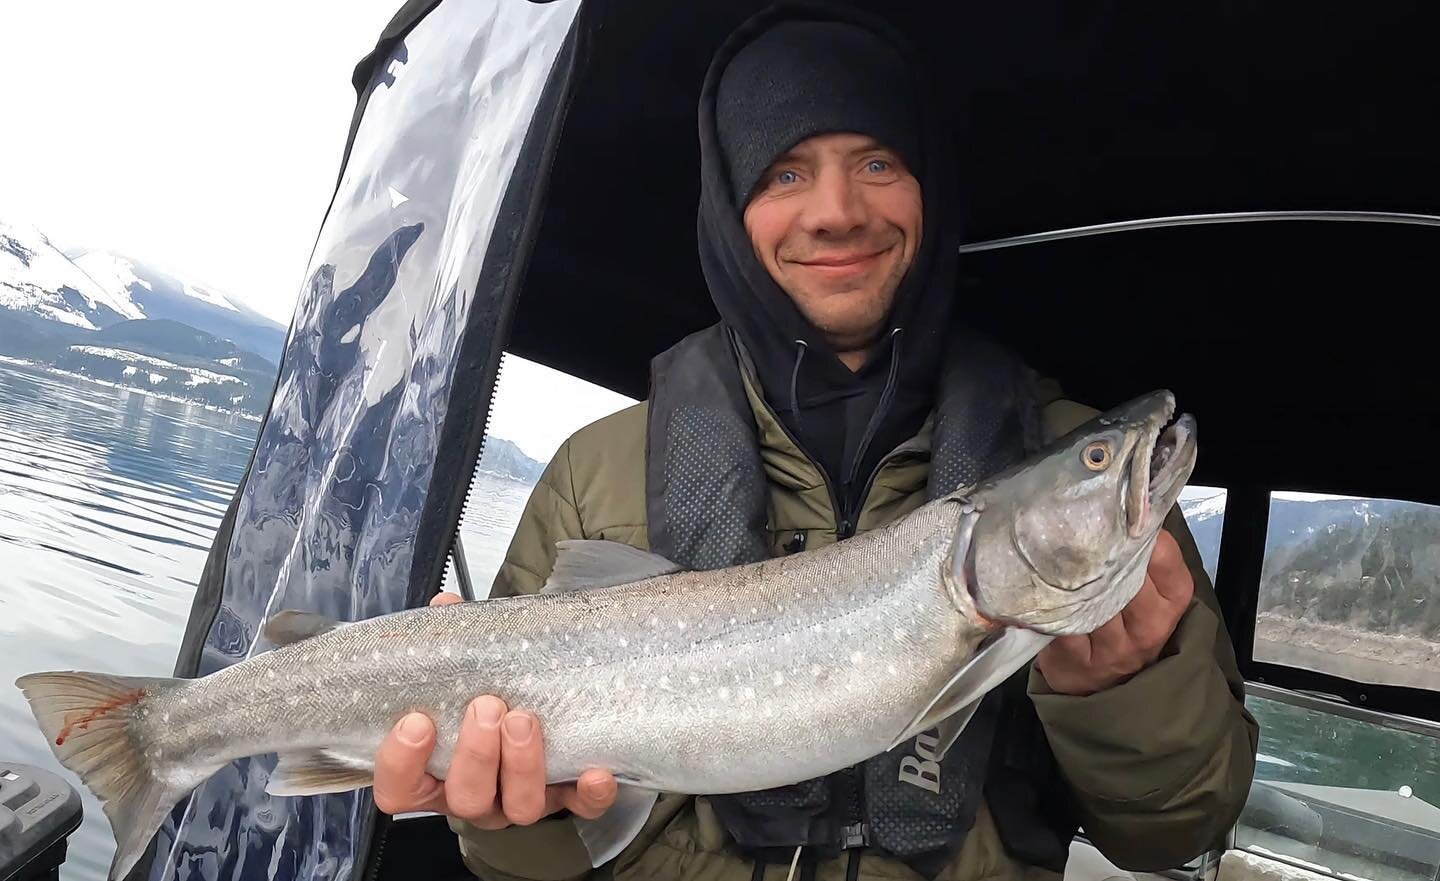 Happy birthday buddy it&rsquo;s been a few years since we caught a good one. Good way to start a new trip around the sun! #birtday #bulltrout #bulltroutfishing #lakefishing #seerevelstoke #kootrocks #revelstoked #getoutside #uglystick #fishinatorlure